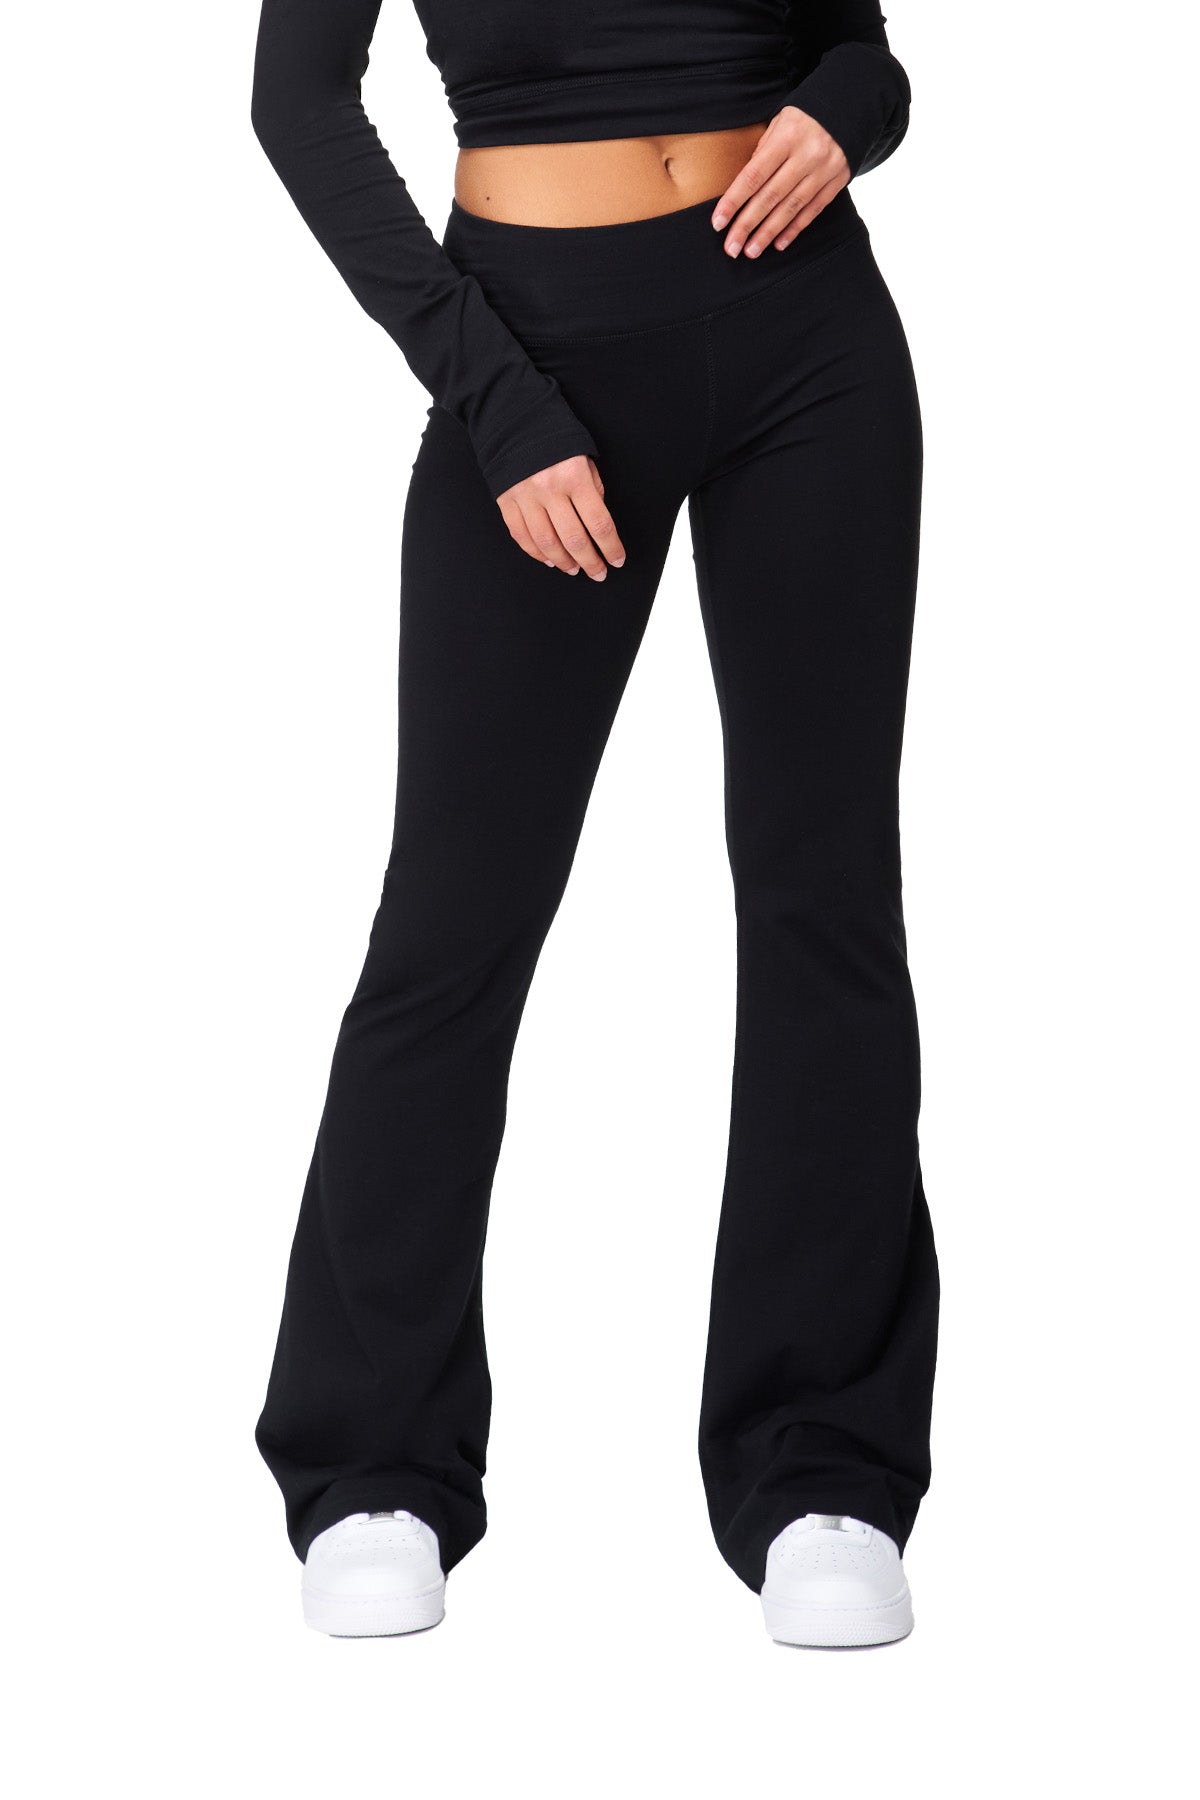 Tiana - Flared Pant with 3" Band